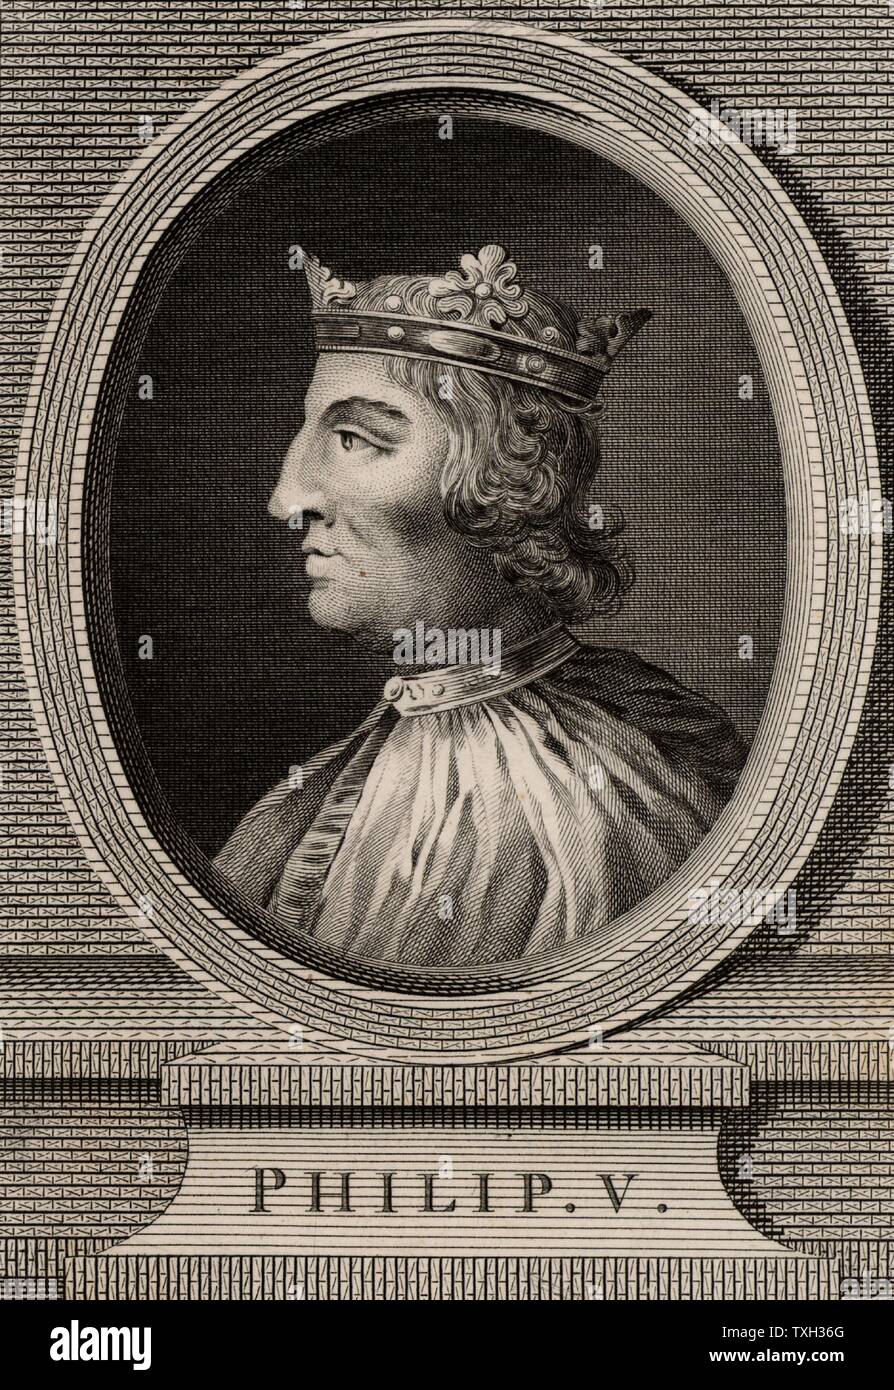 Philip V, the Tall (1293-1322) a member of the Capetian dynasty,  king of France from 1316. Copperplate engraving, 1793. Stock Photo